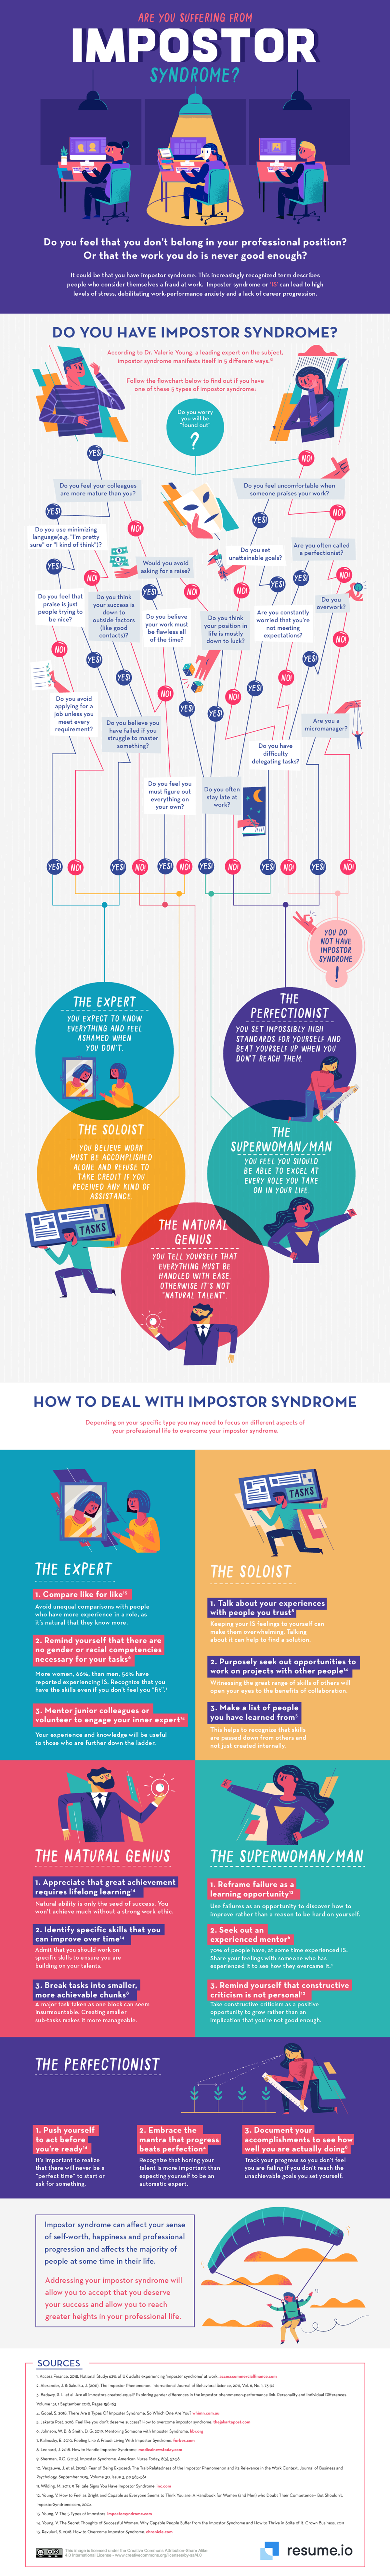 Impostor syndrome infographic